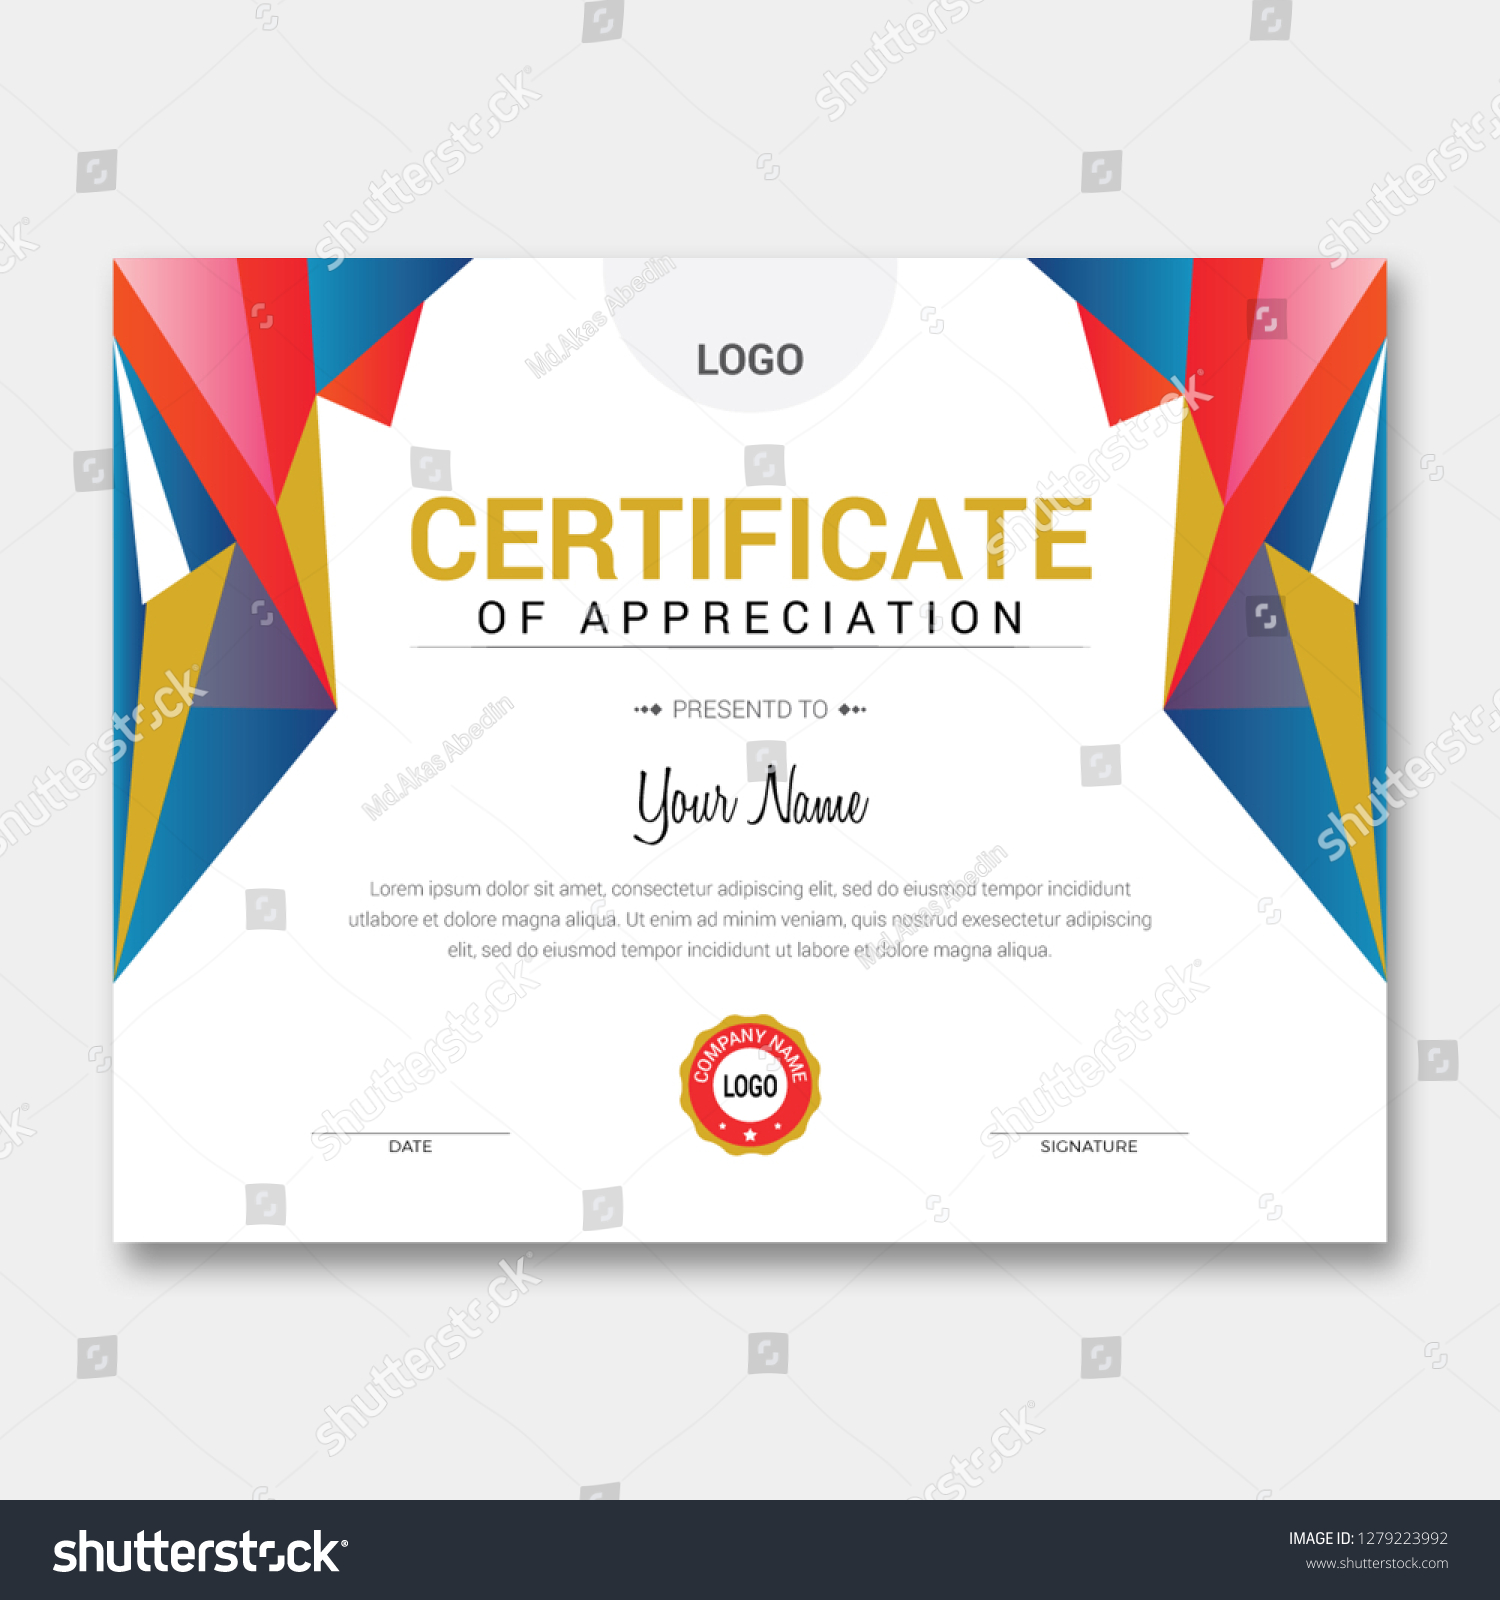 Download Certificate Template from image.shutterstock.com